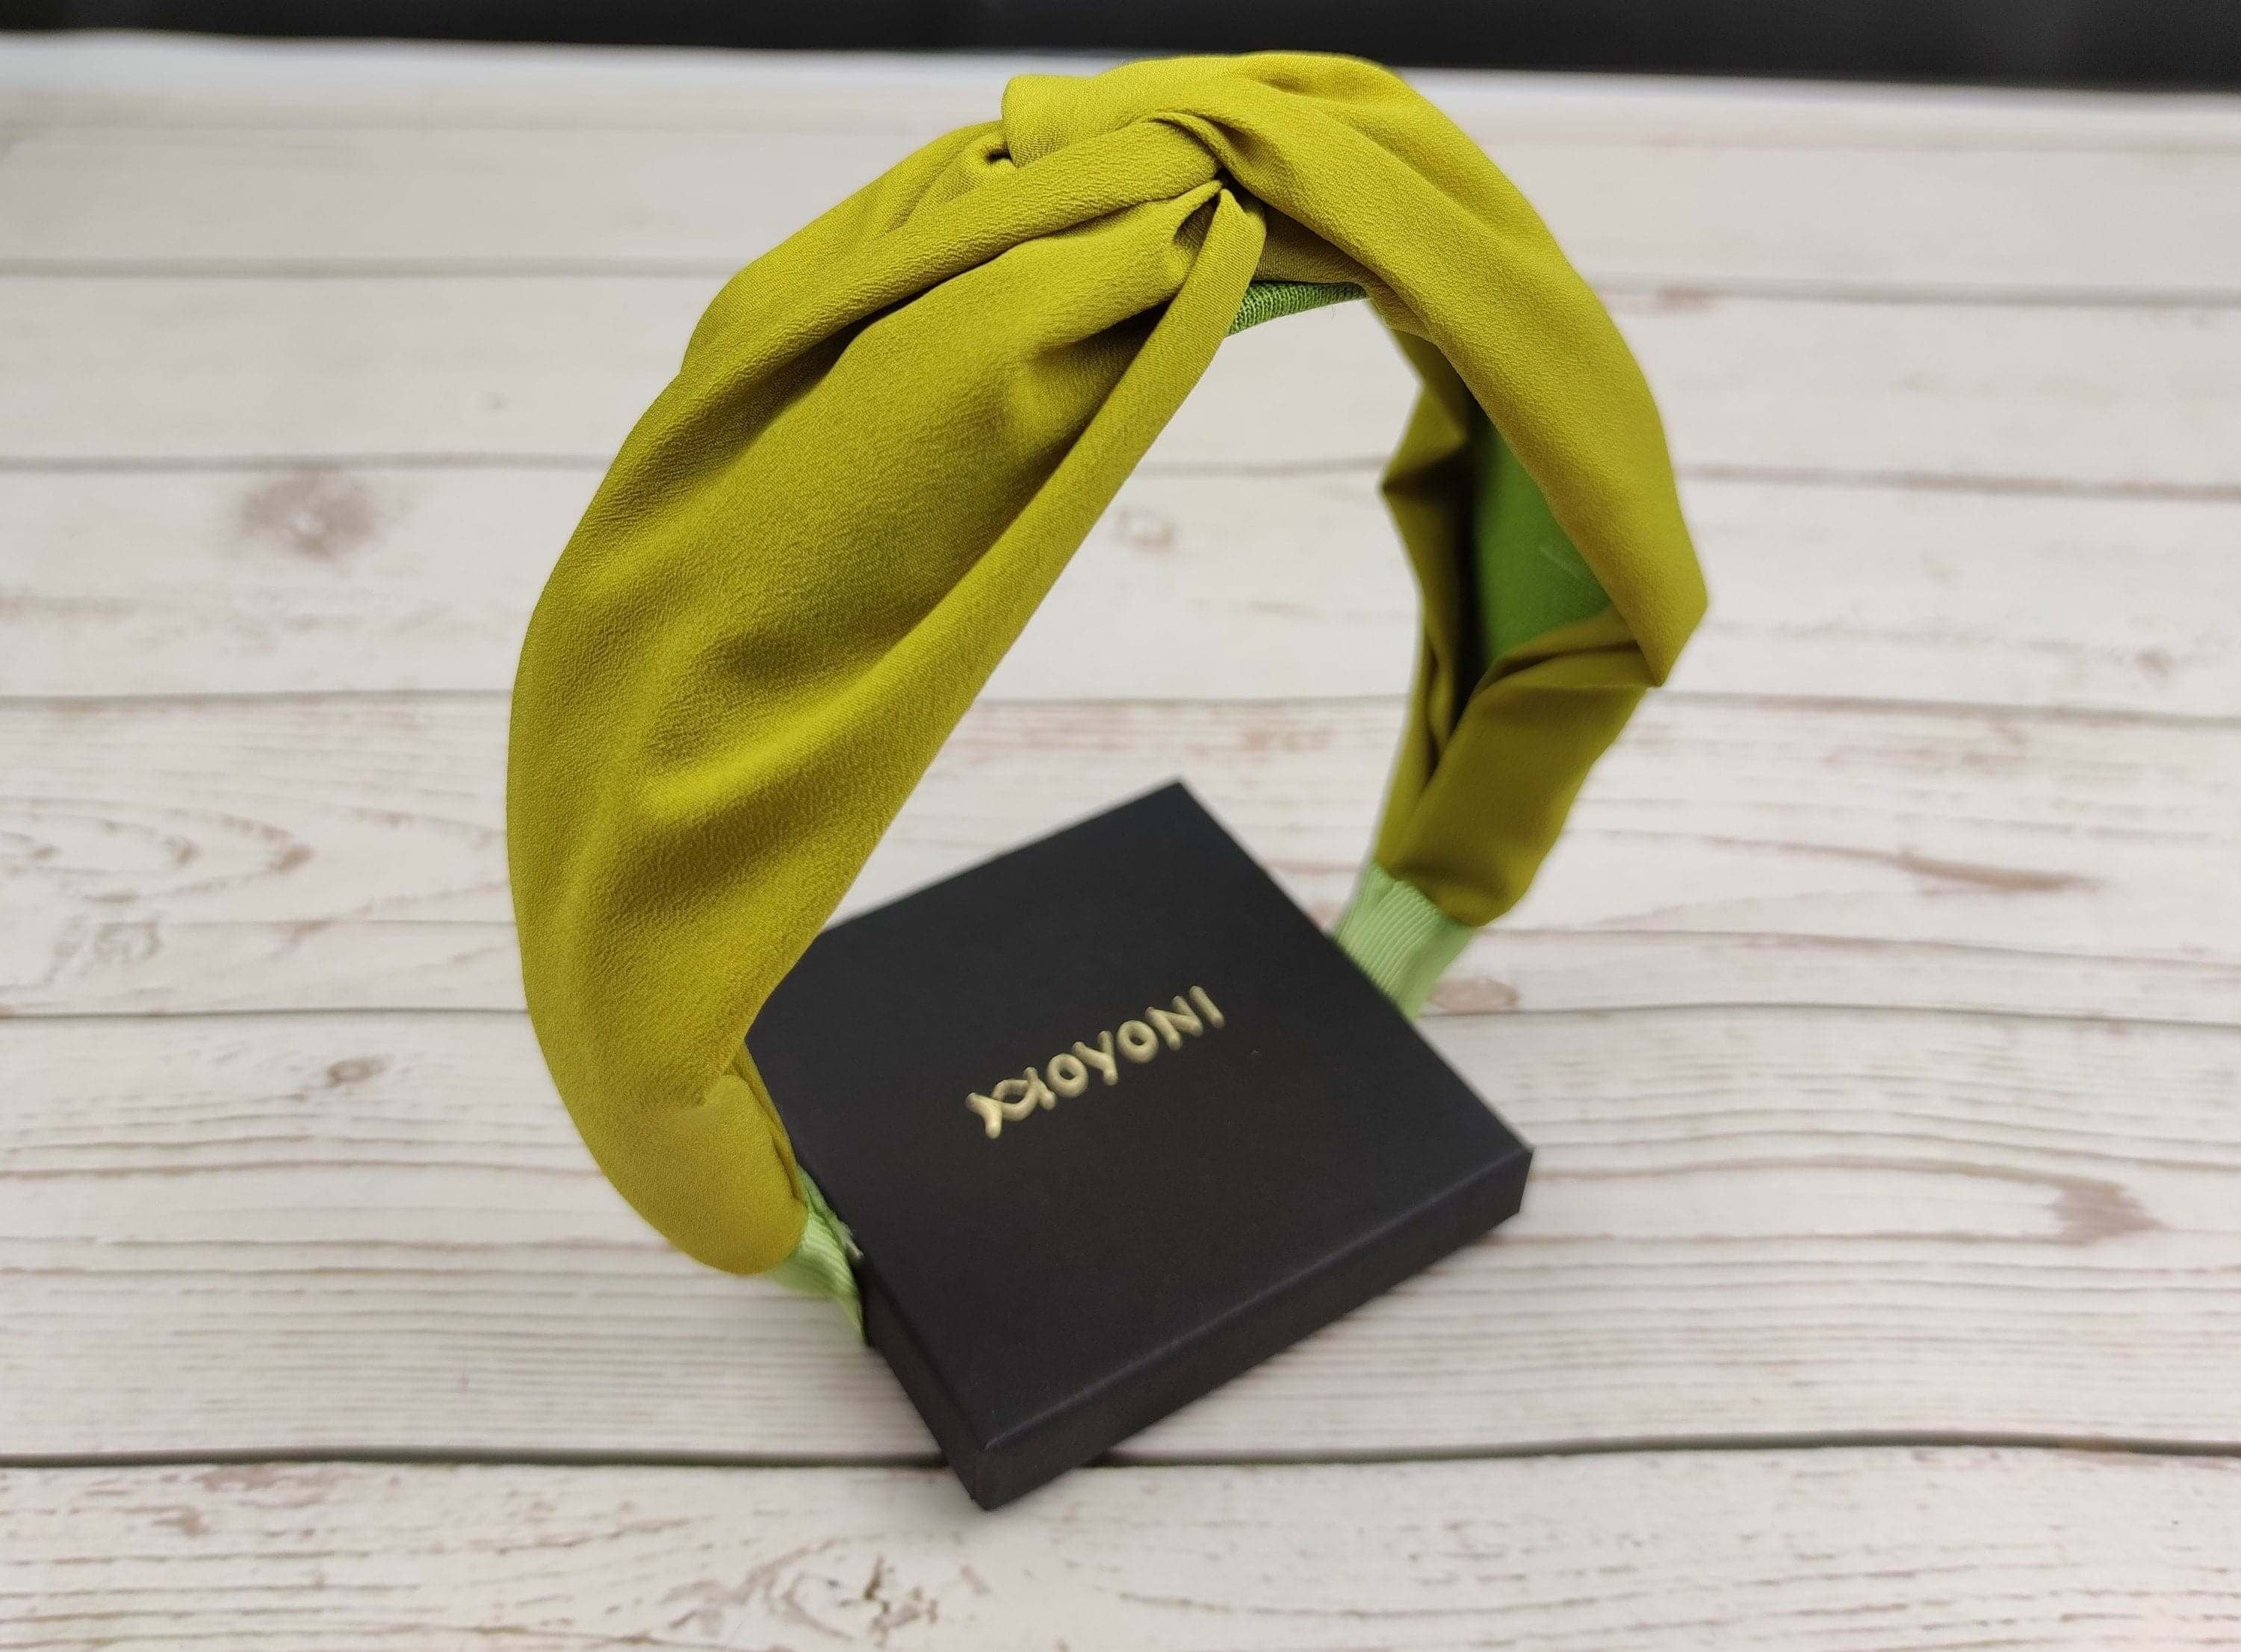 Want to add a little bit of personality to your outfit? Try out the wide headband by Green Headband Studio. This headband is designed to fit most head sizes and comes in a variety of colors and styles.